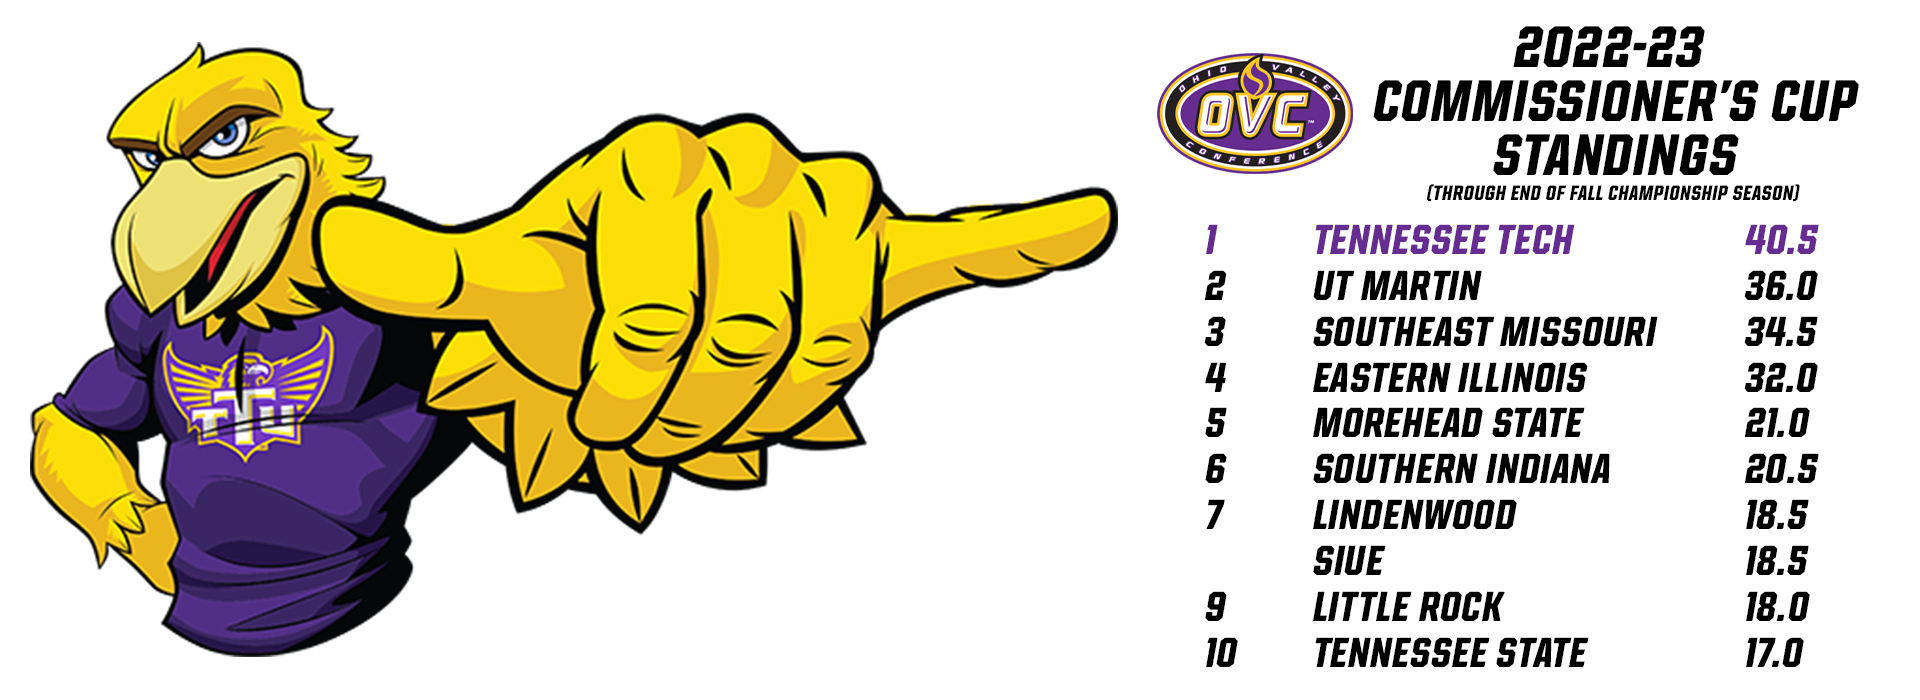 Tennessee Tech leads OVC Commissioner's Cup standings following end of fall championship season